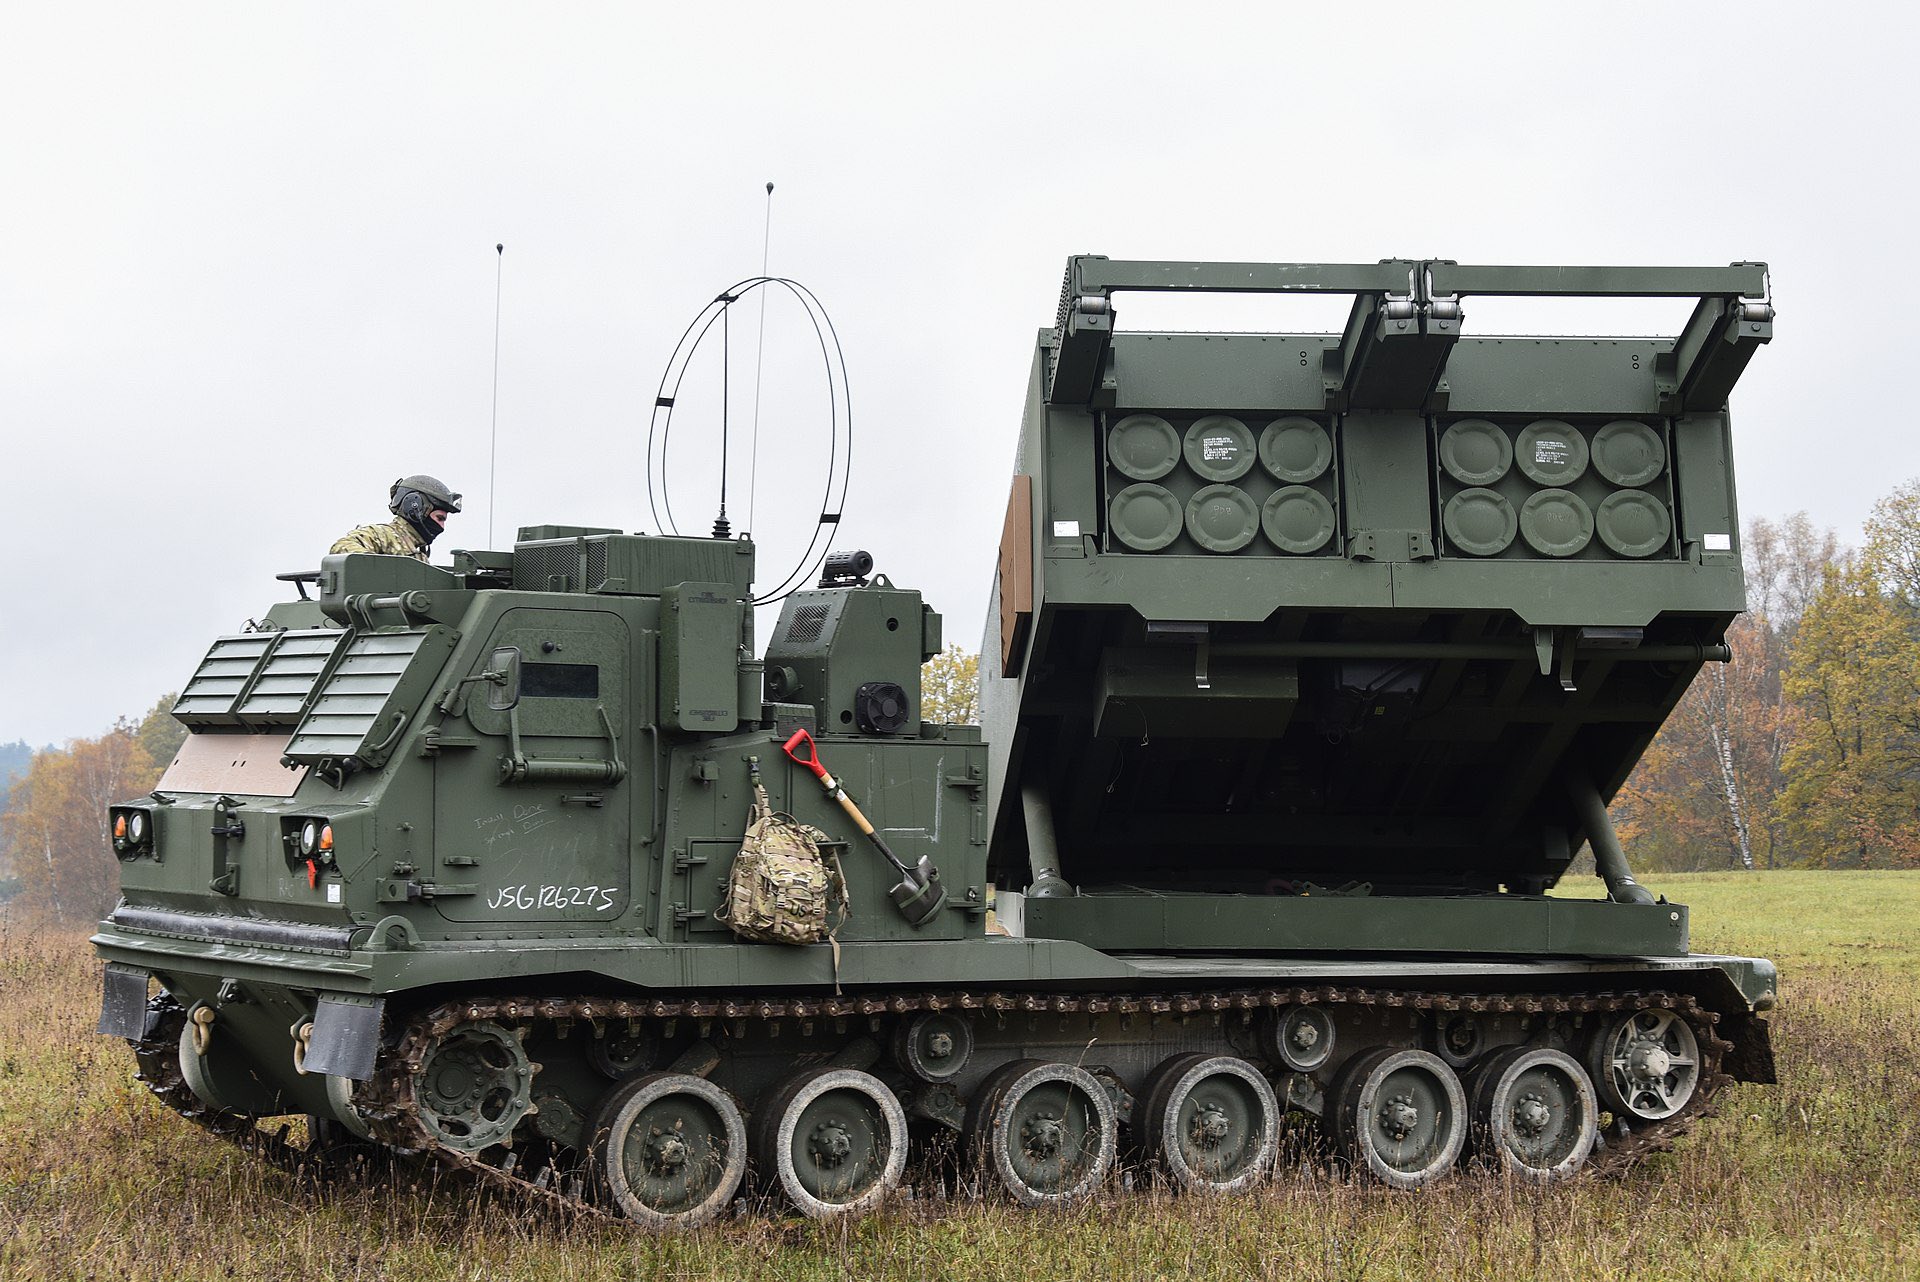 It's official: MARS II rocket systems have already arrived in Ukraine and are ready to destroy Russian ammunition depots